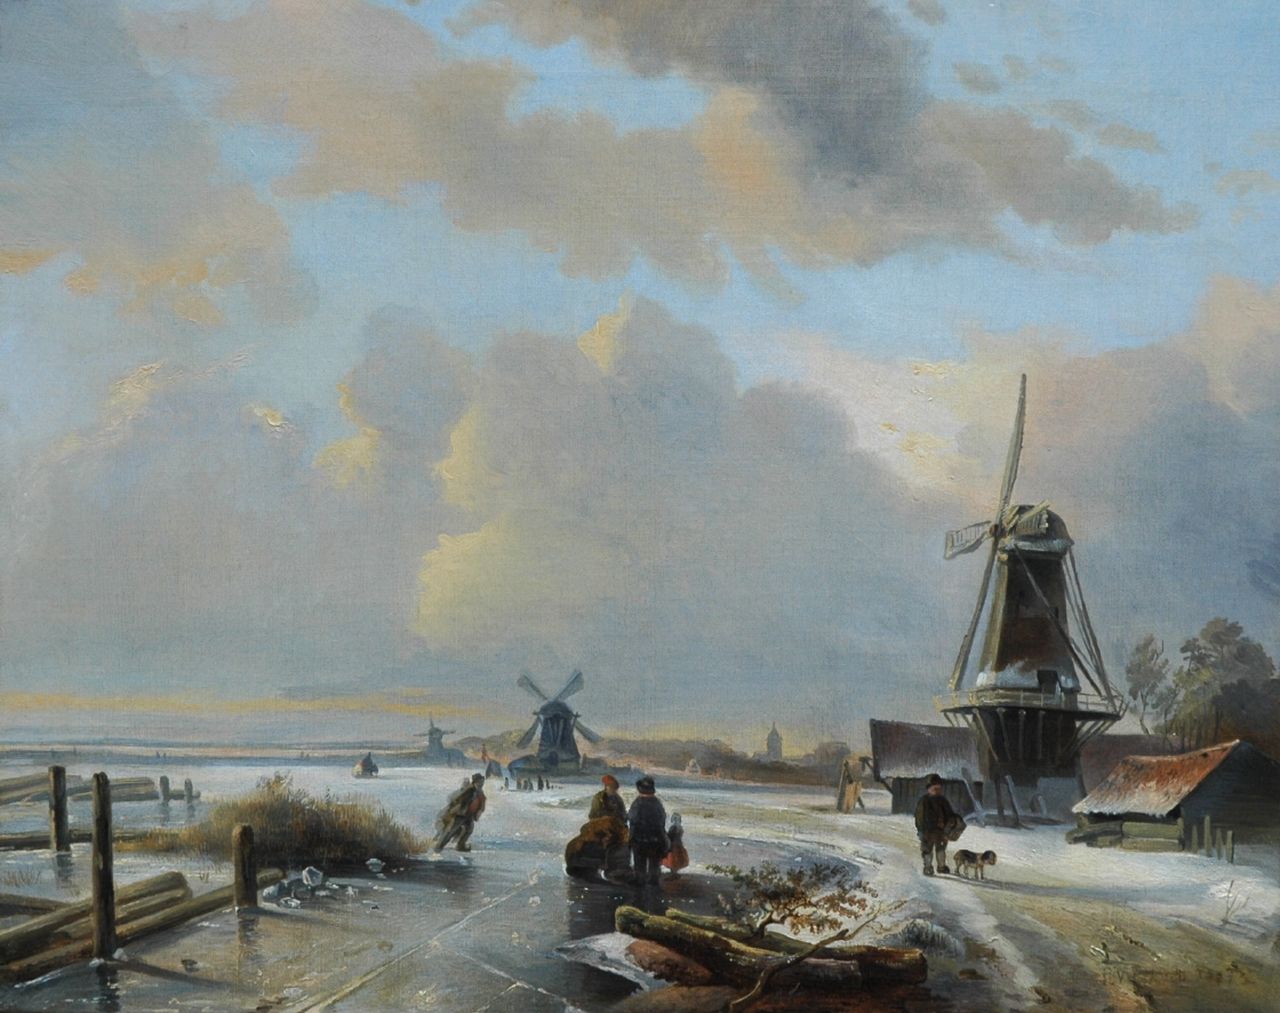 Voskuil P.  | Pieter Voskuil, A winter landscape with skaters on a frozen waterway, oil on canvas 39.1 x 48.8 cm, signed l.r. and dated 1837